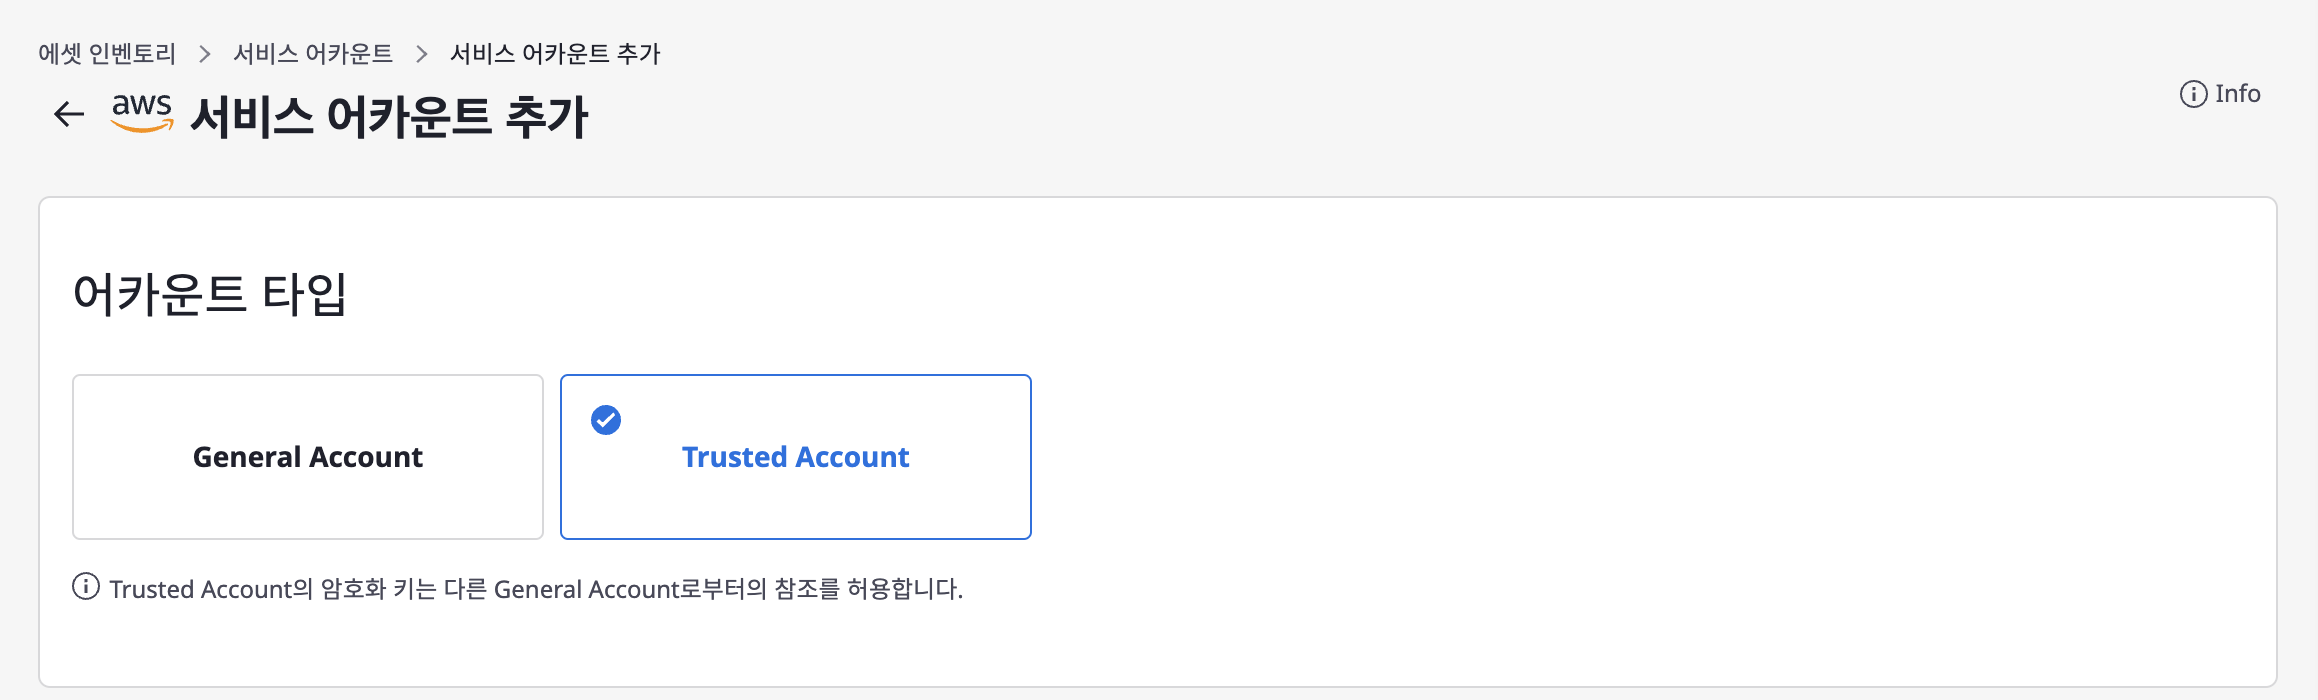 service-account-select-trusted-accout